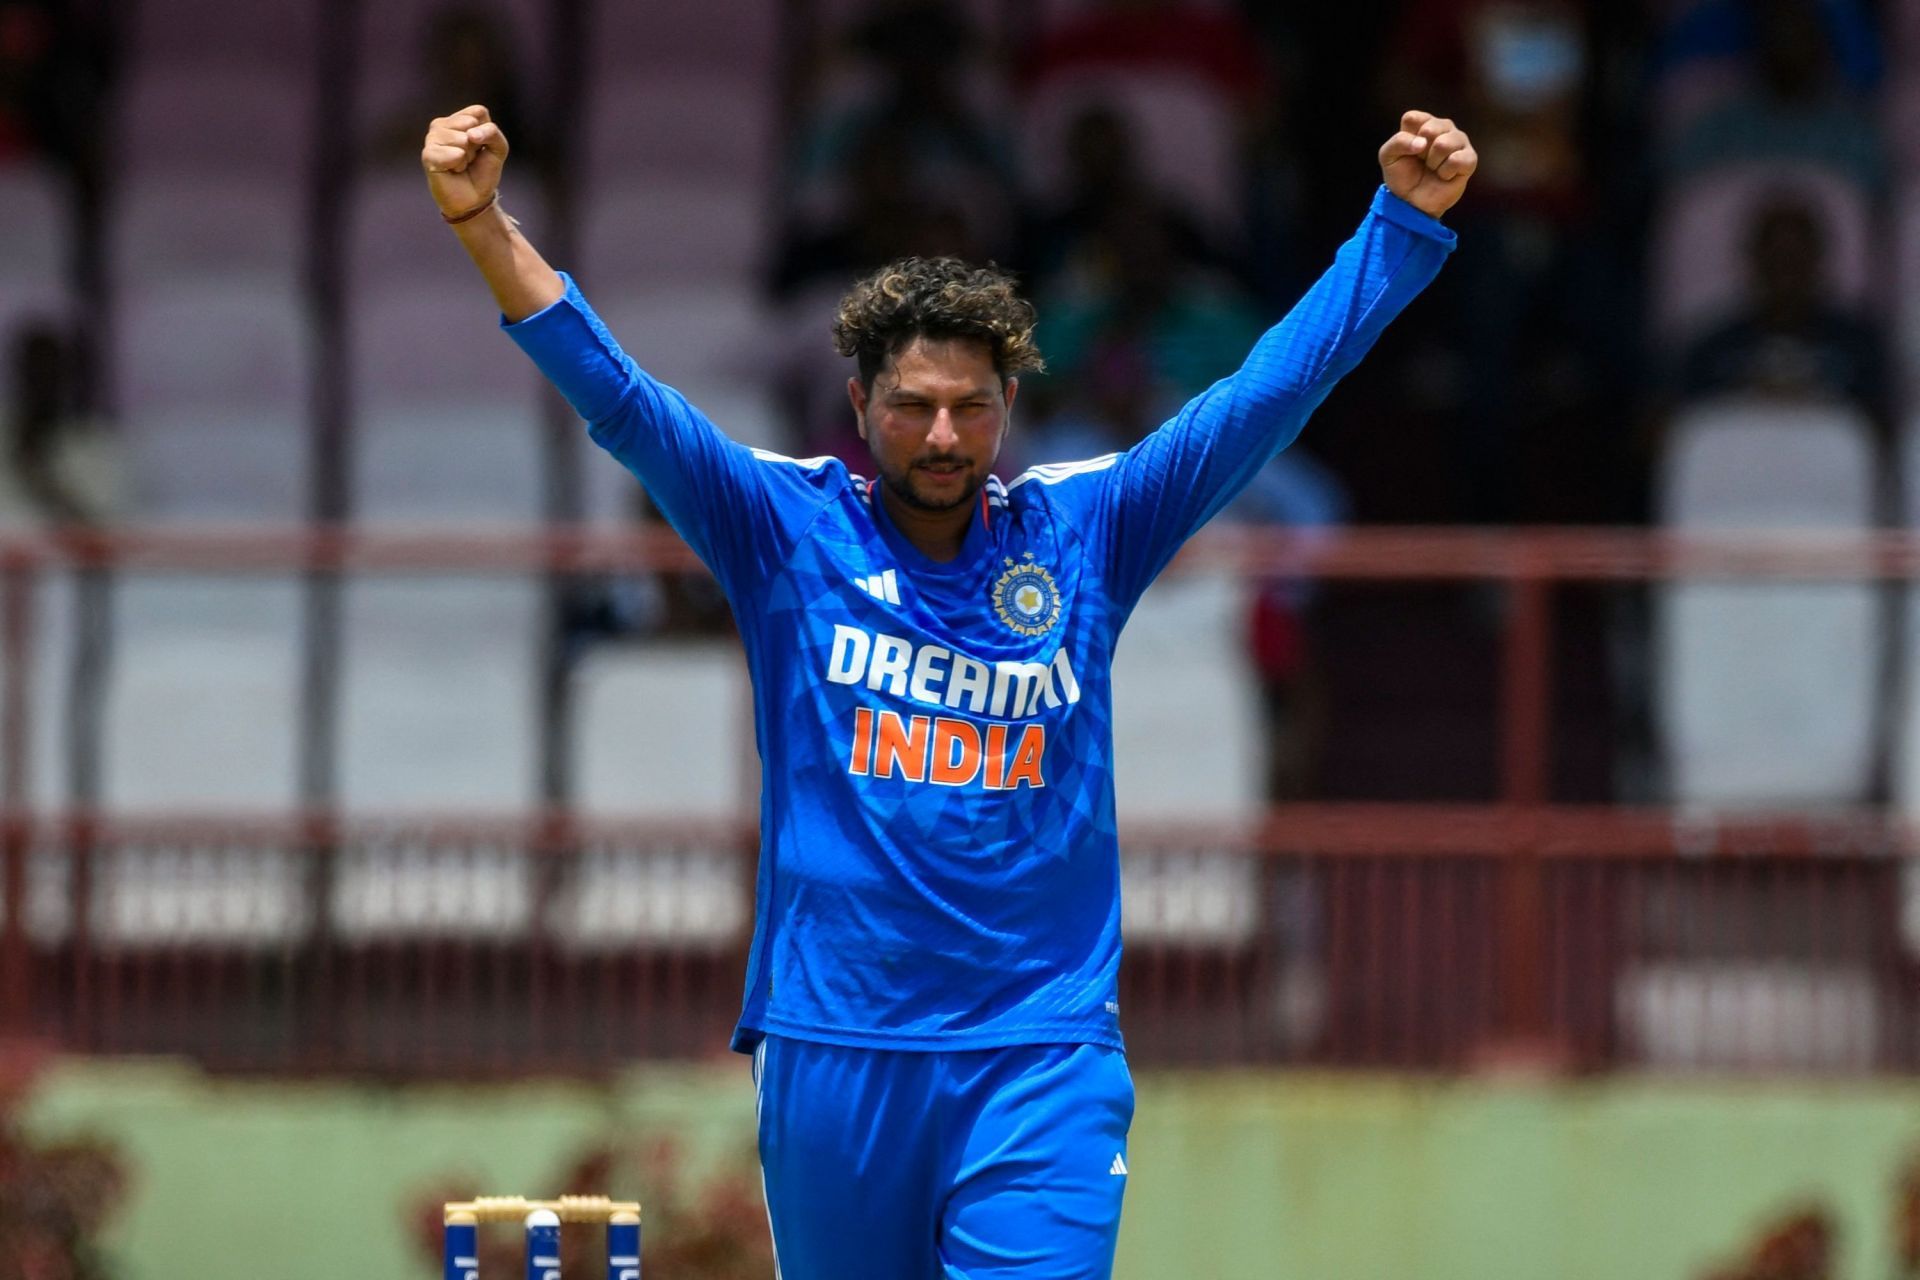 Kuldeep Yadav was the only Indian bowler to escape unscathed